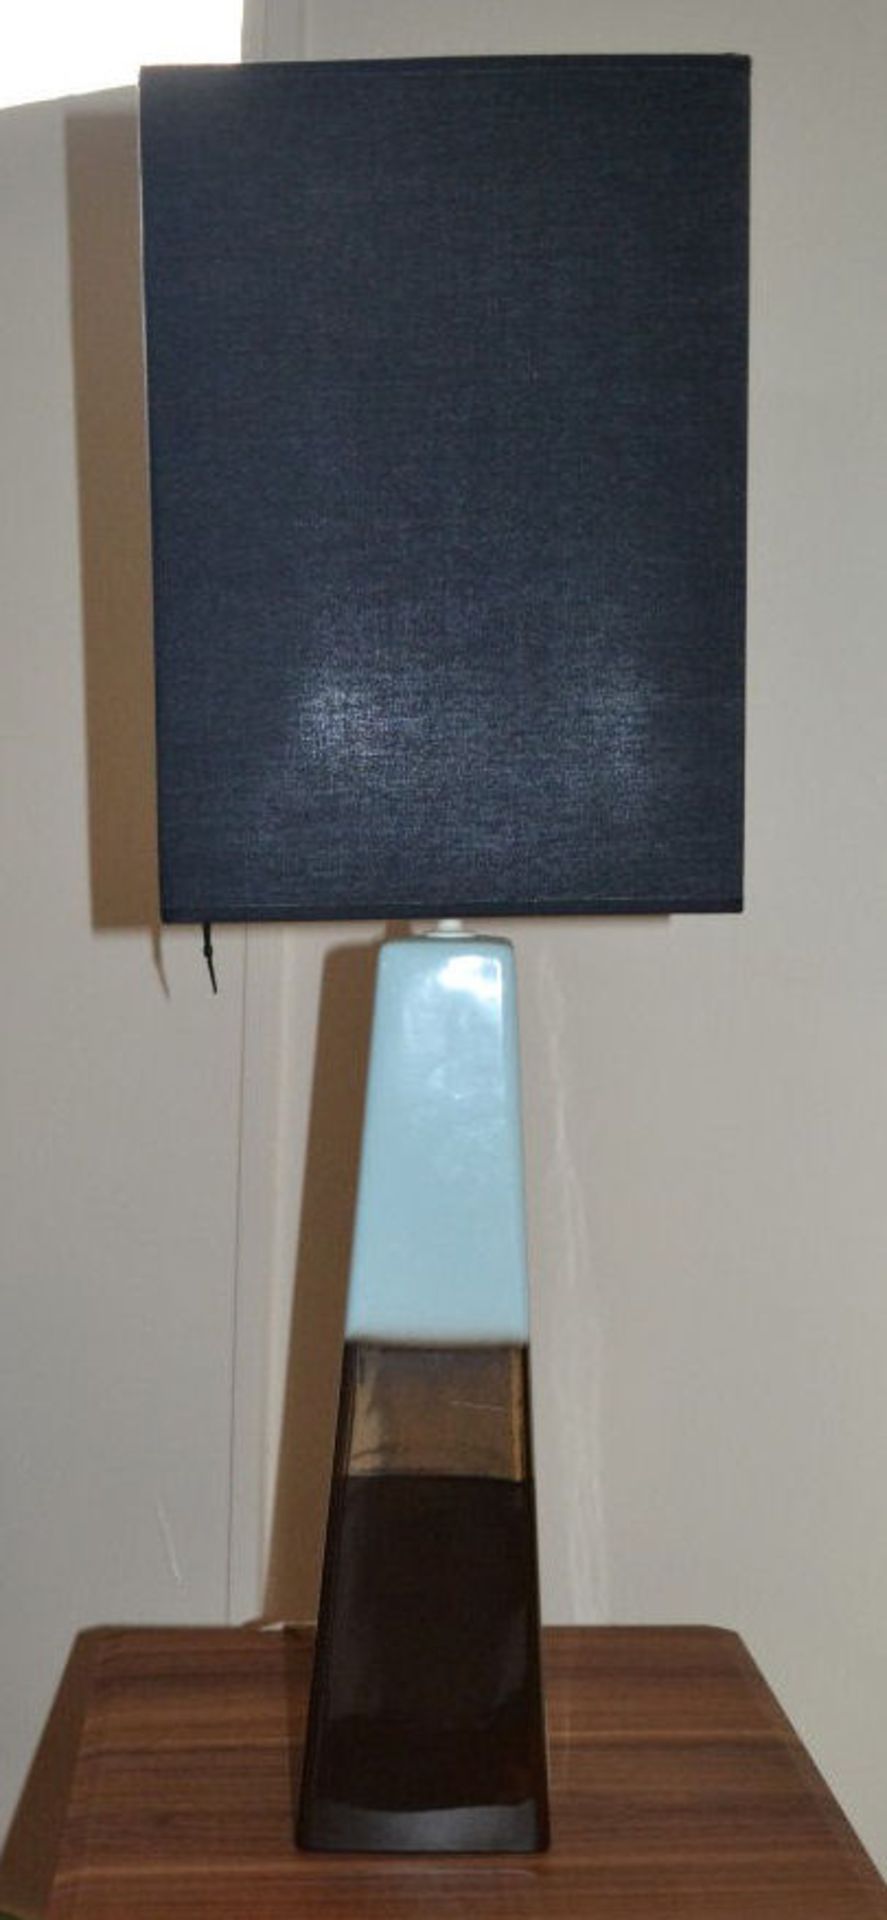 1 x Tall Lamp. Very Dark Brown/Copper/Light Blue Tapered Design - Image 3 of 3